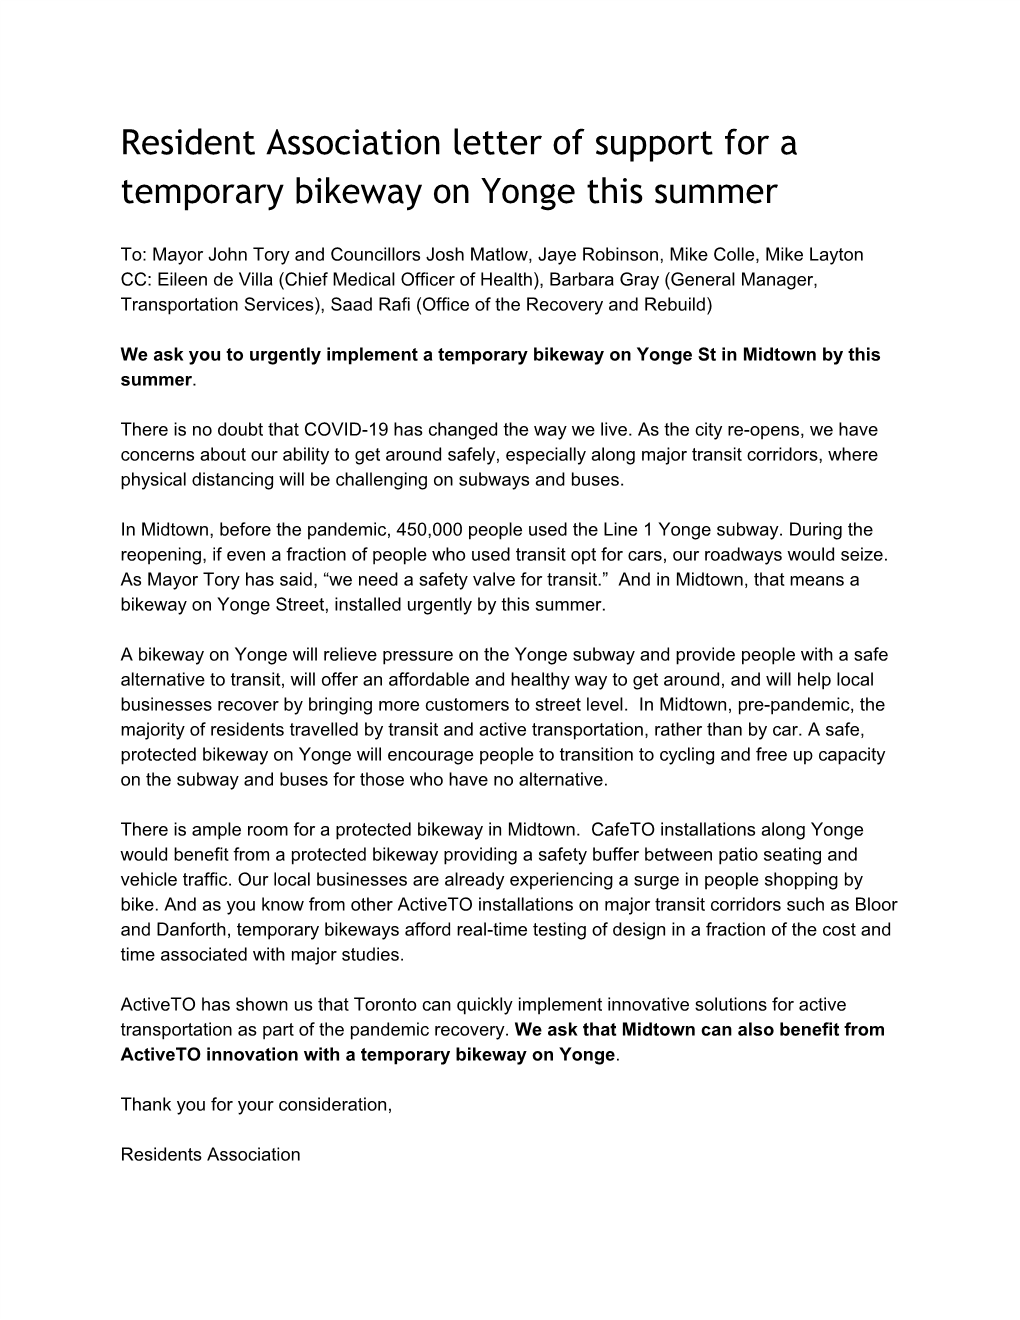 Resident Association Letter of Support for a Temporary Bikeway on Yonge This Summer